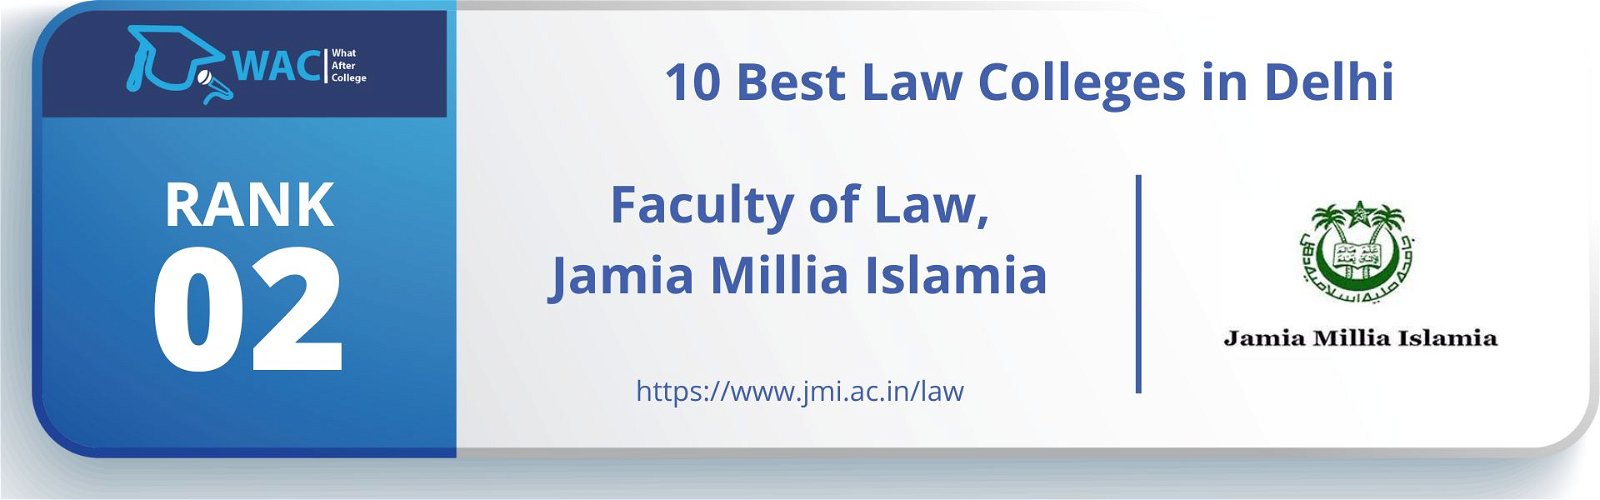 Law Colleges in Delhi